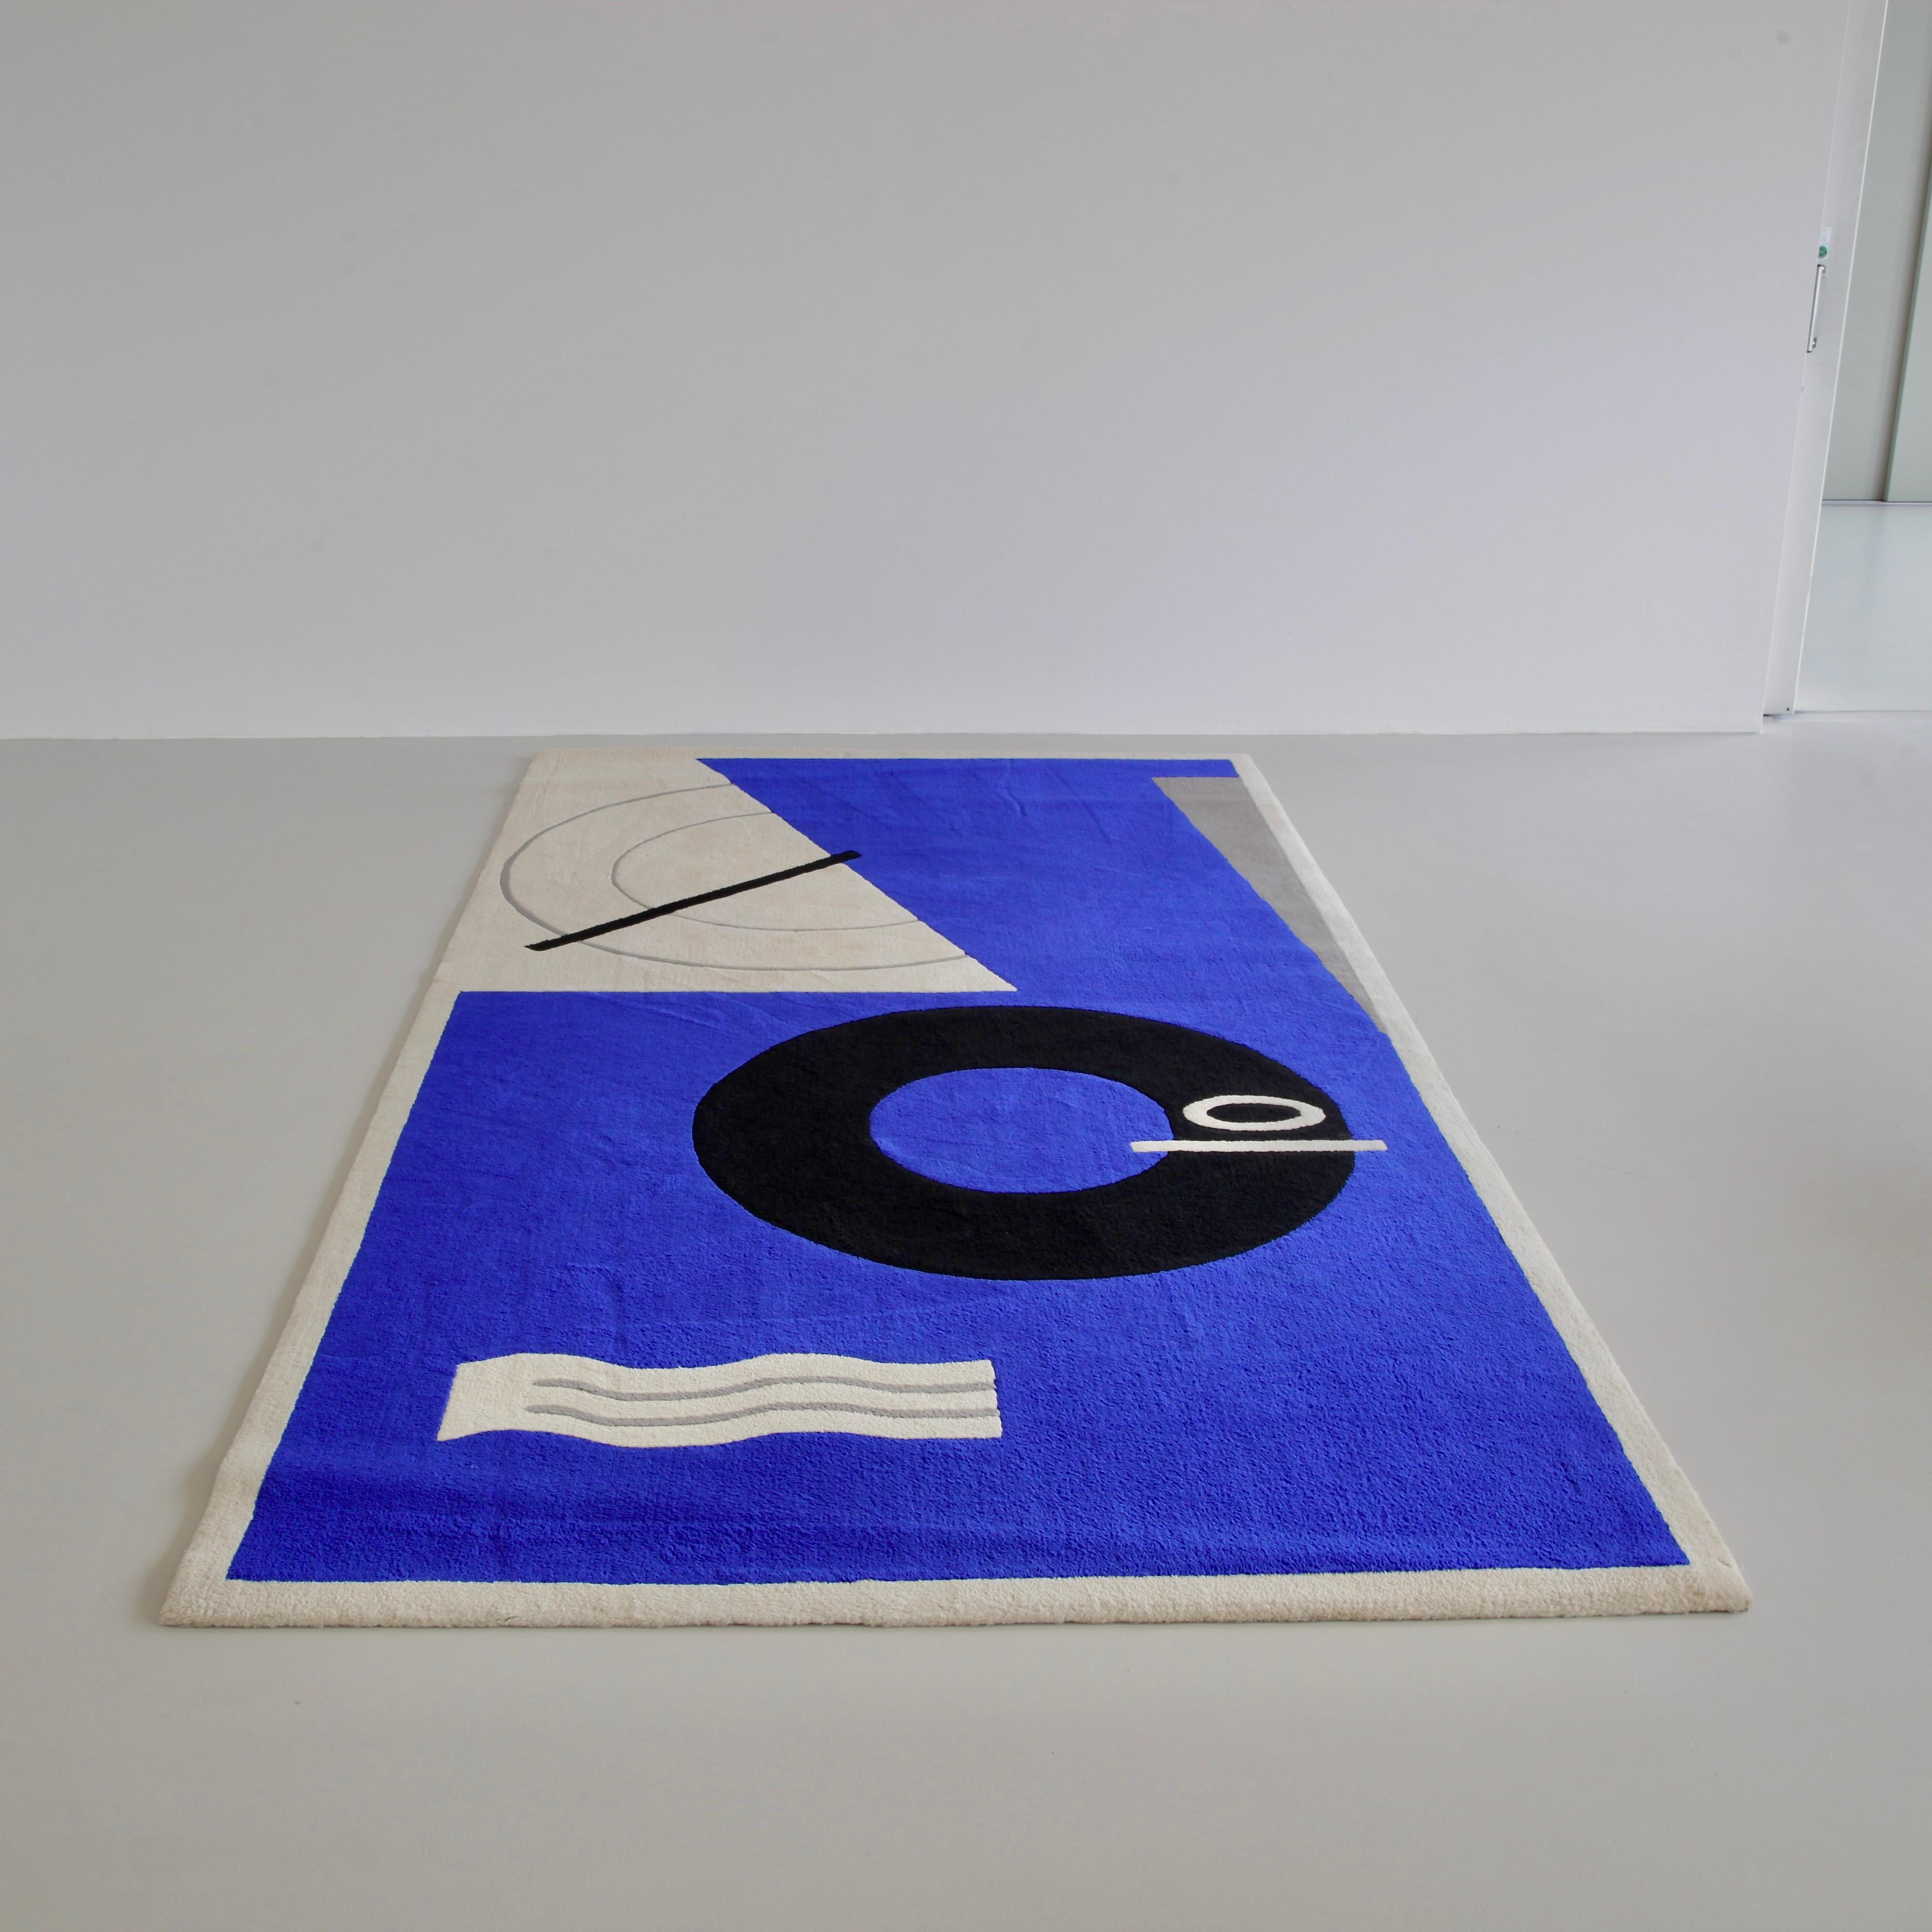 Large rug designed by Eileen Grey. France, Ecart, c 2010.

Pure new wool carpet designed by Eileen Grey in 1927 for her house in the south of France, a modernist villa in Roquebrune-Cap-Martin. The rug was titled Méditerranée. Beautiful quality,